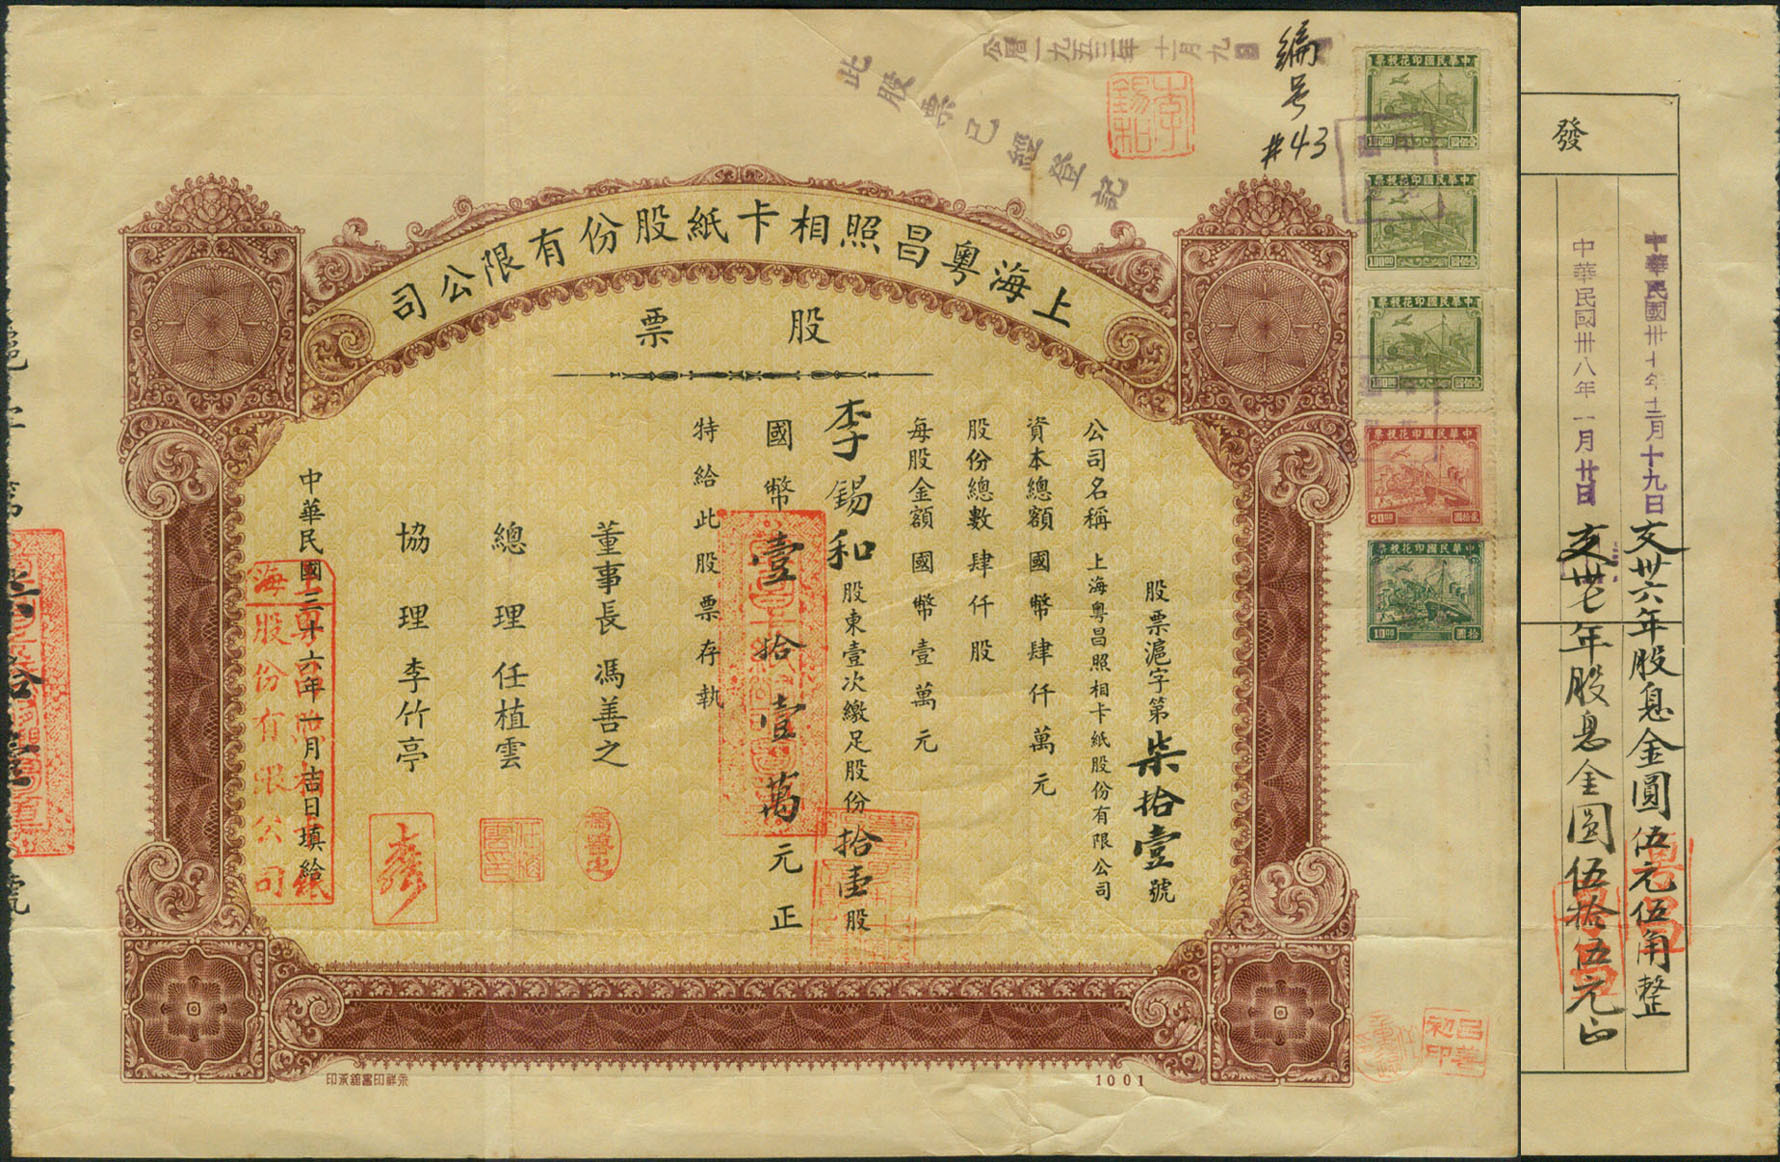 S1158 Shanghai Yue-Chang Photo-Card Co. Ltd, Share Certificate of 1947